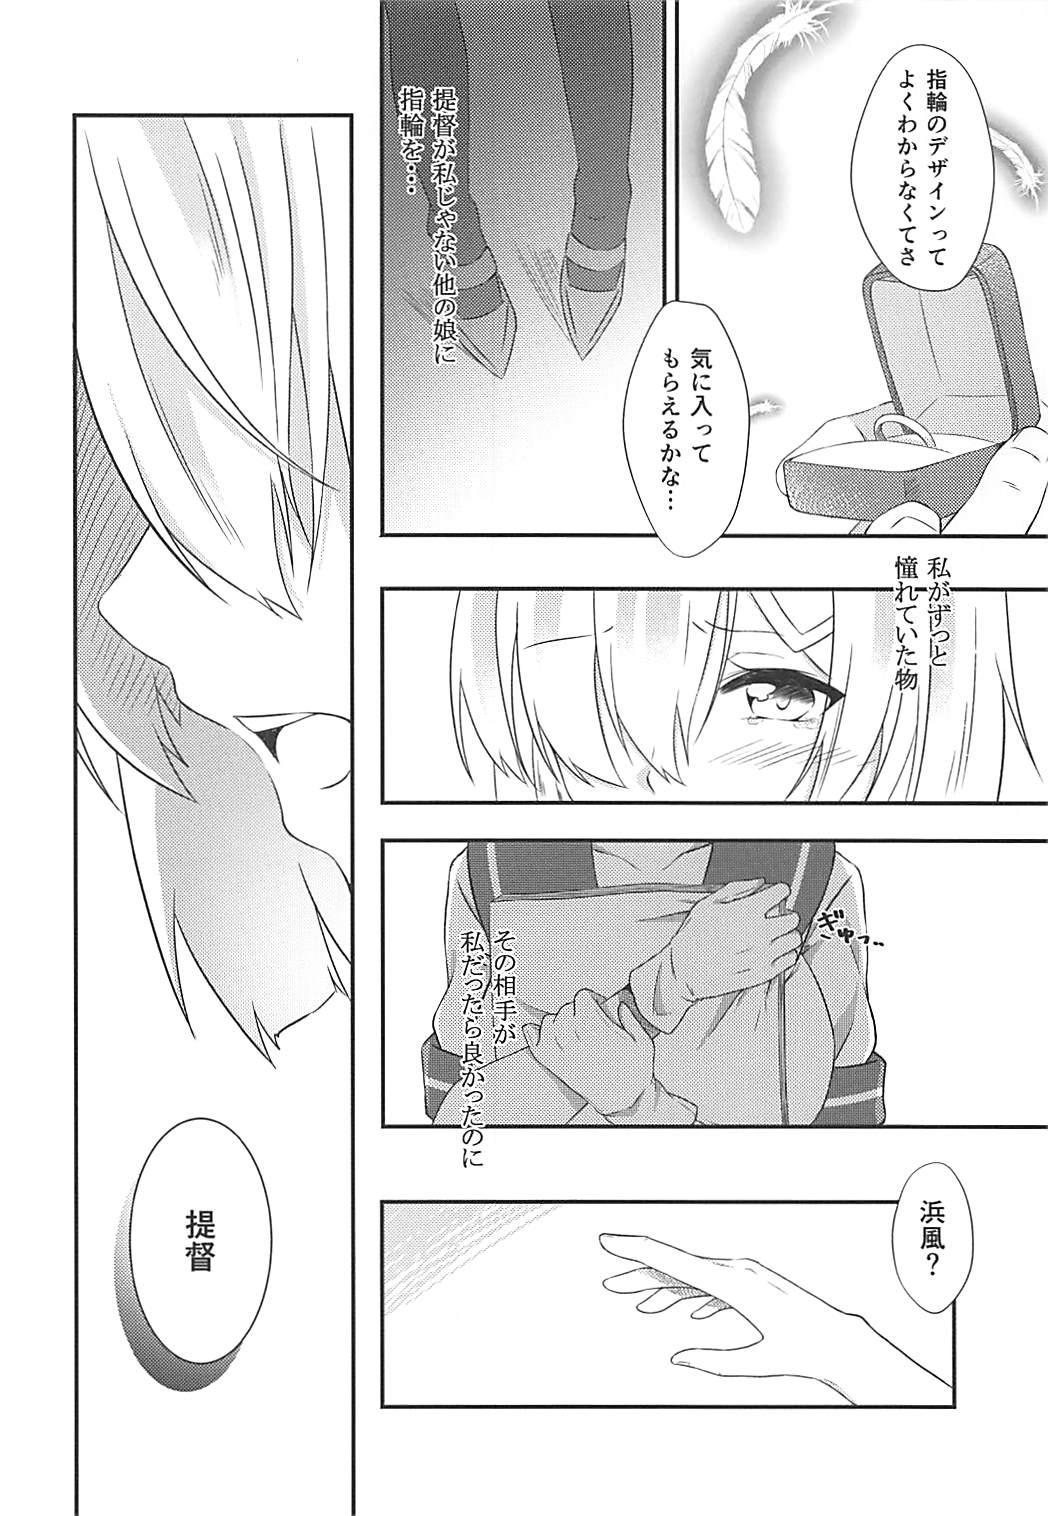 Asshole a happy ending - Kantai collection Ball Sucking - Page 5